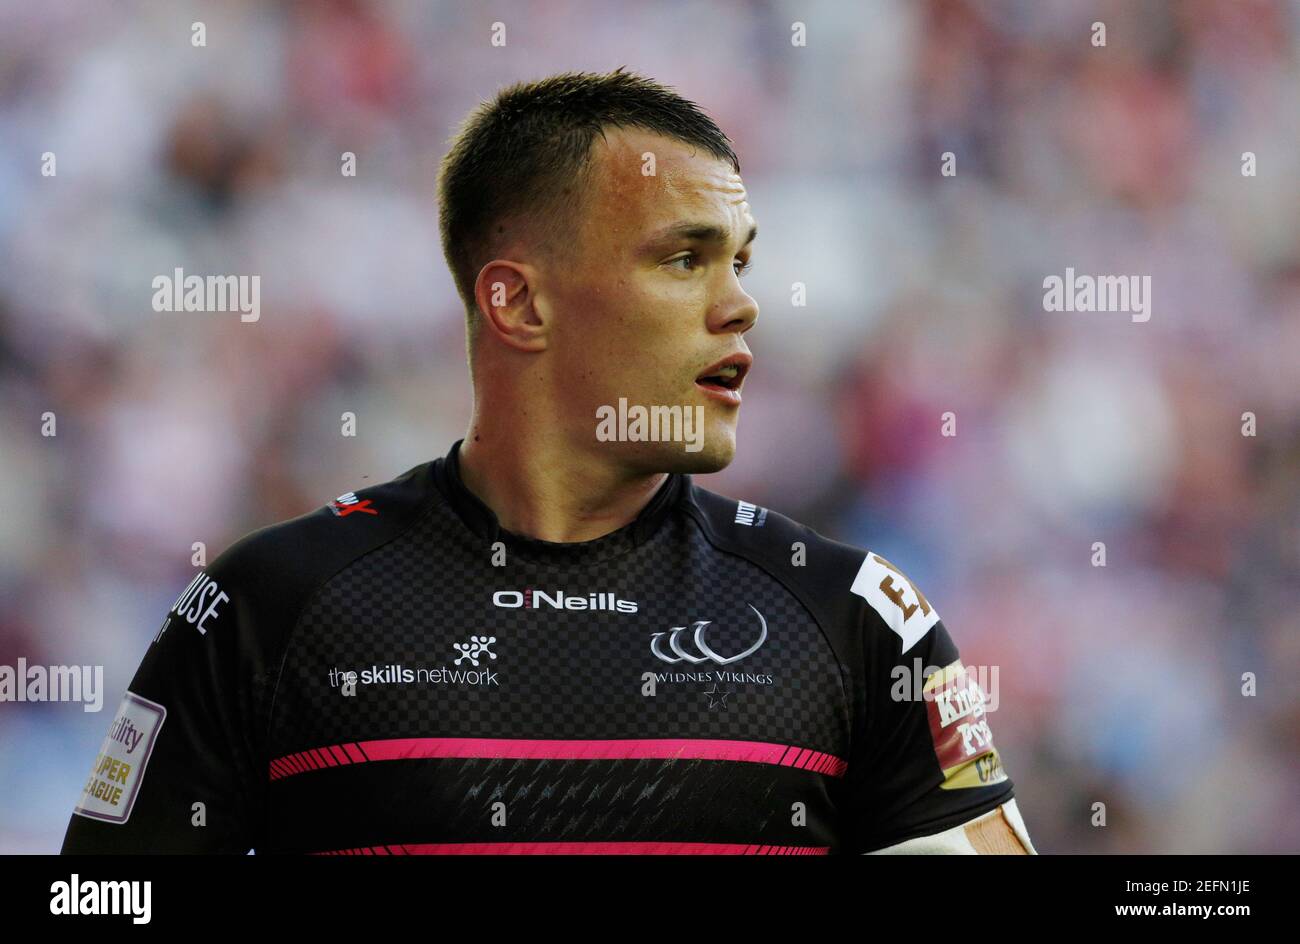 Rugby League - Wigan Warriors v Widnes Vikings - First Utility Super League - DW Stadium - 17/7/15 Eamon O'Carroll of Widnes Vikings Mandatory Credit: Action Images / Craig Brough  EDITORIAL USE ONLY. Stock Photo